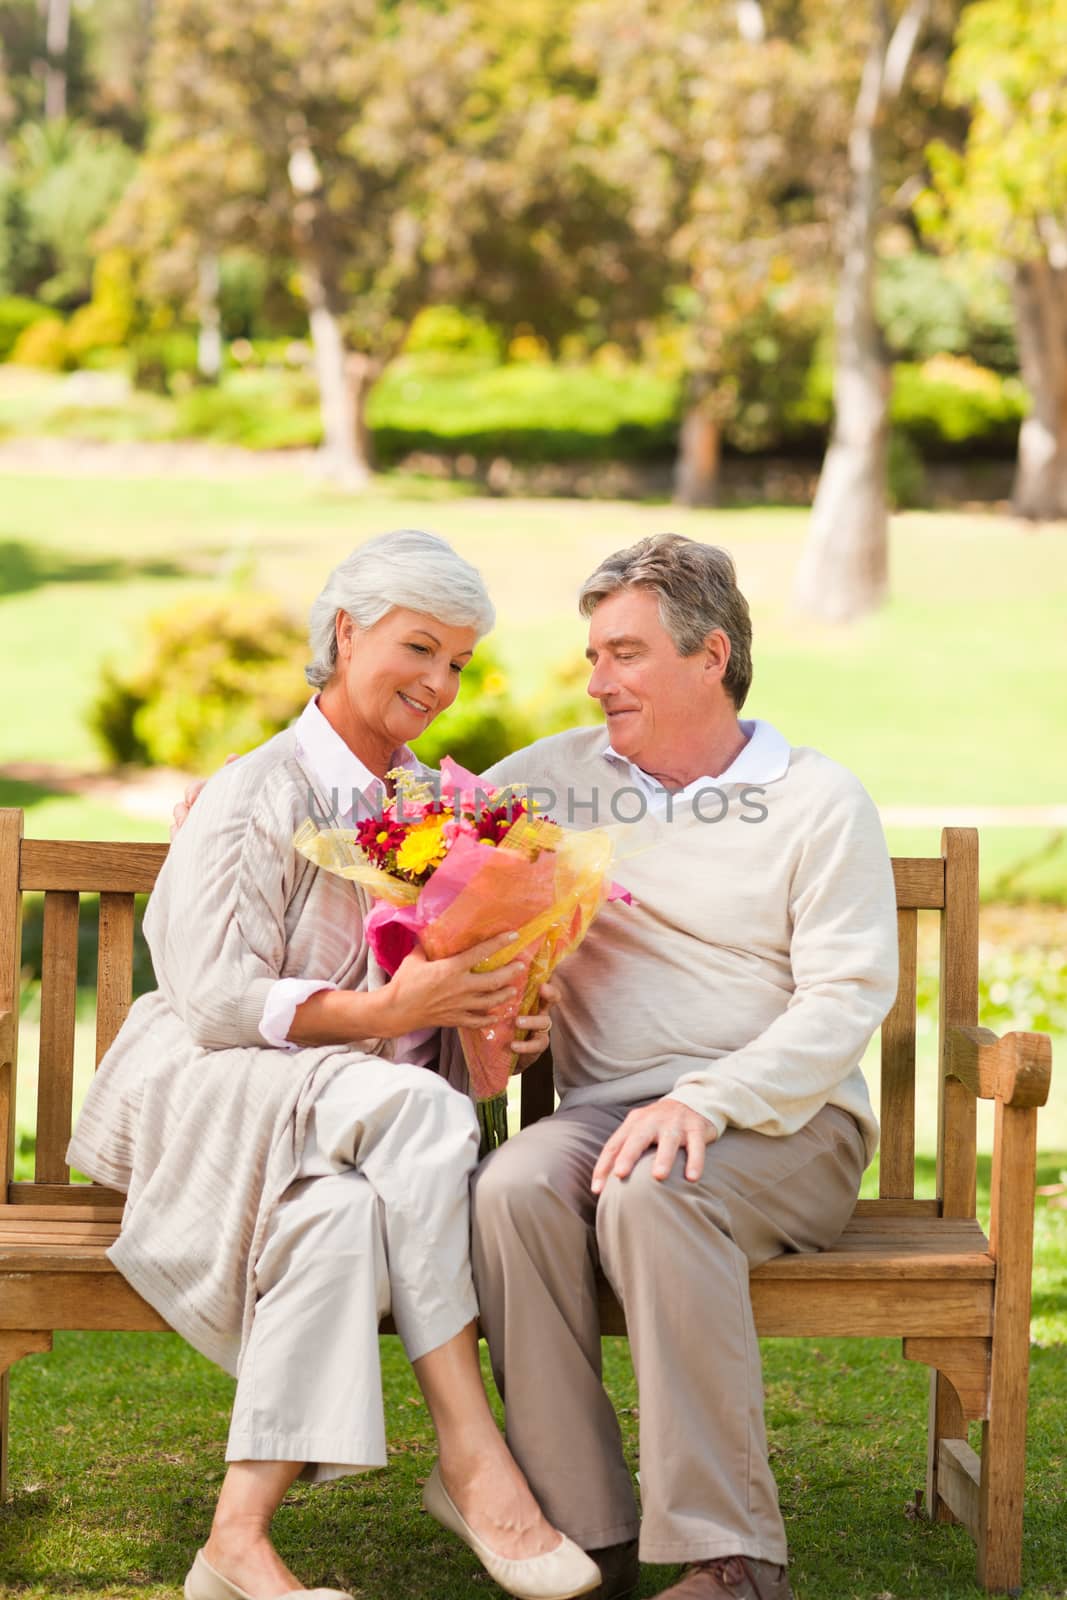 Senior man offering flowers to his wife during the summer